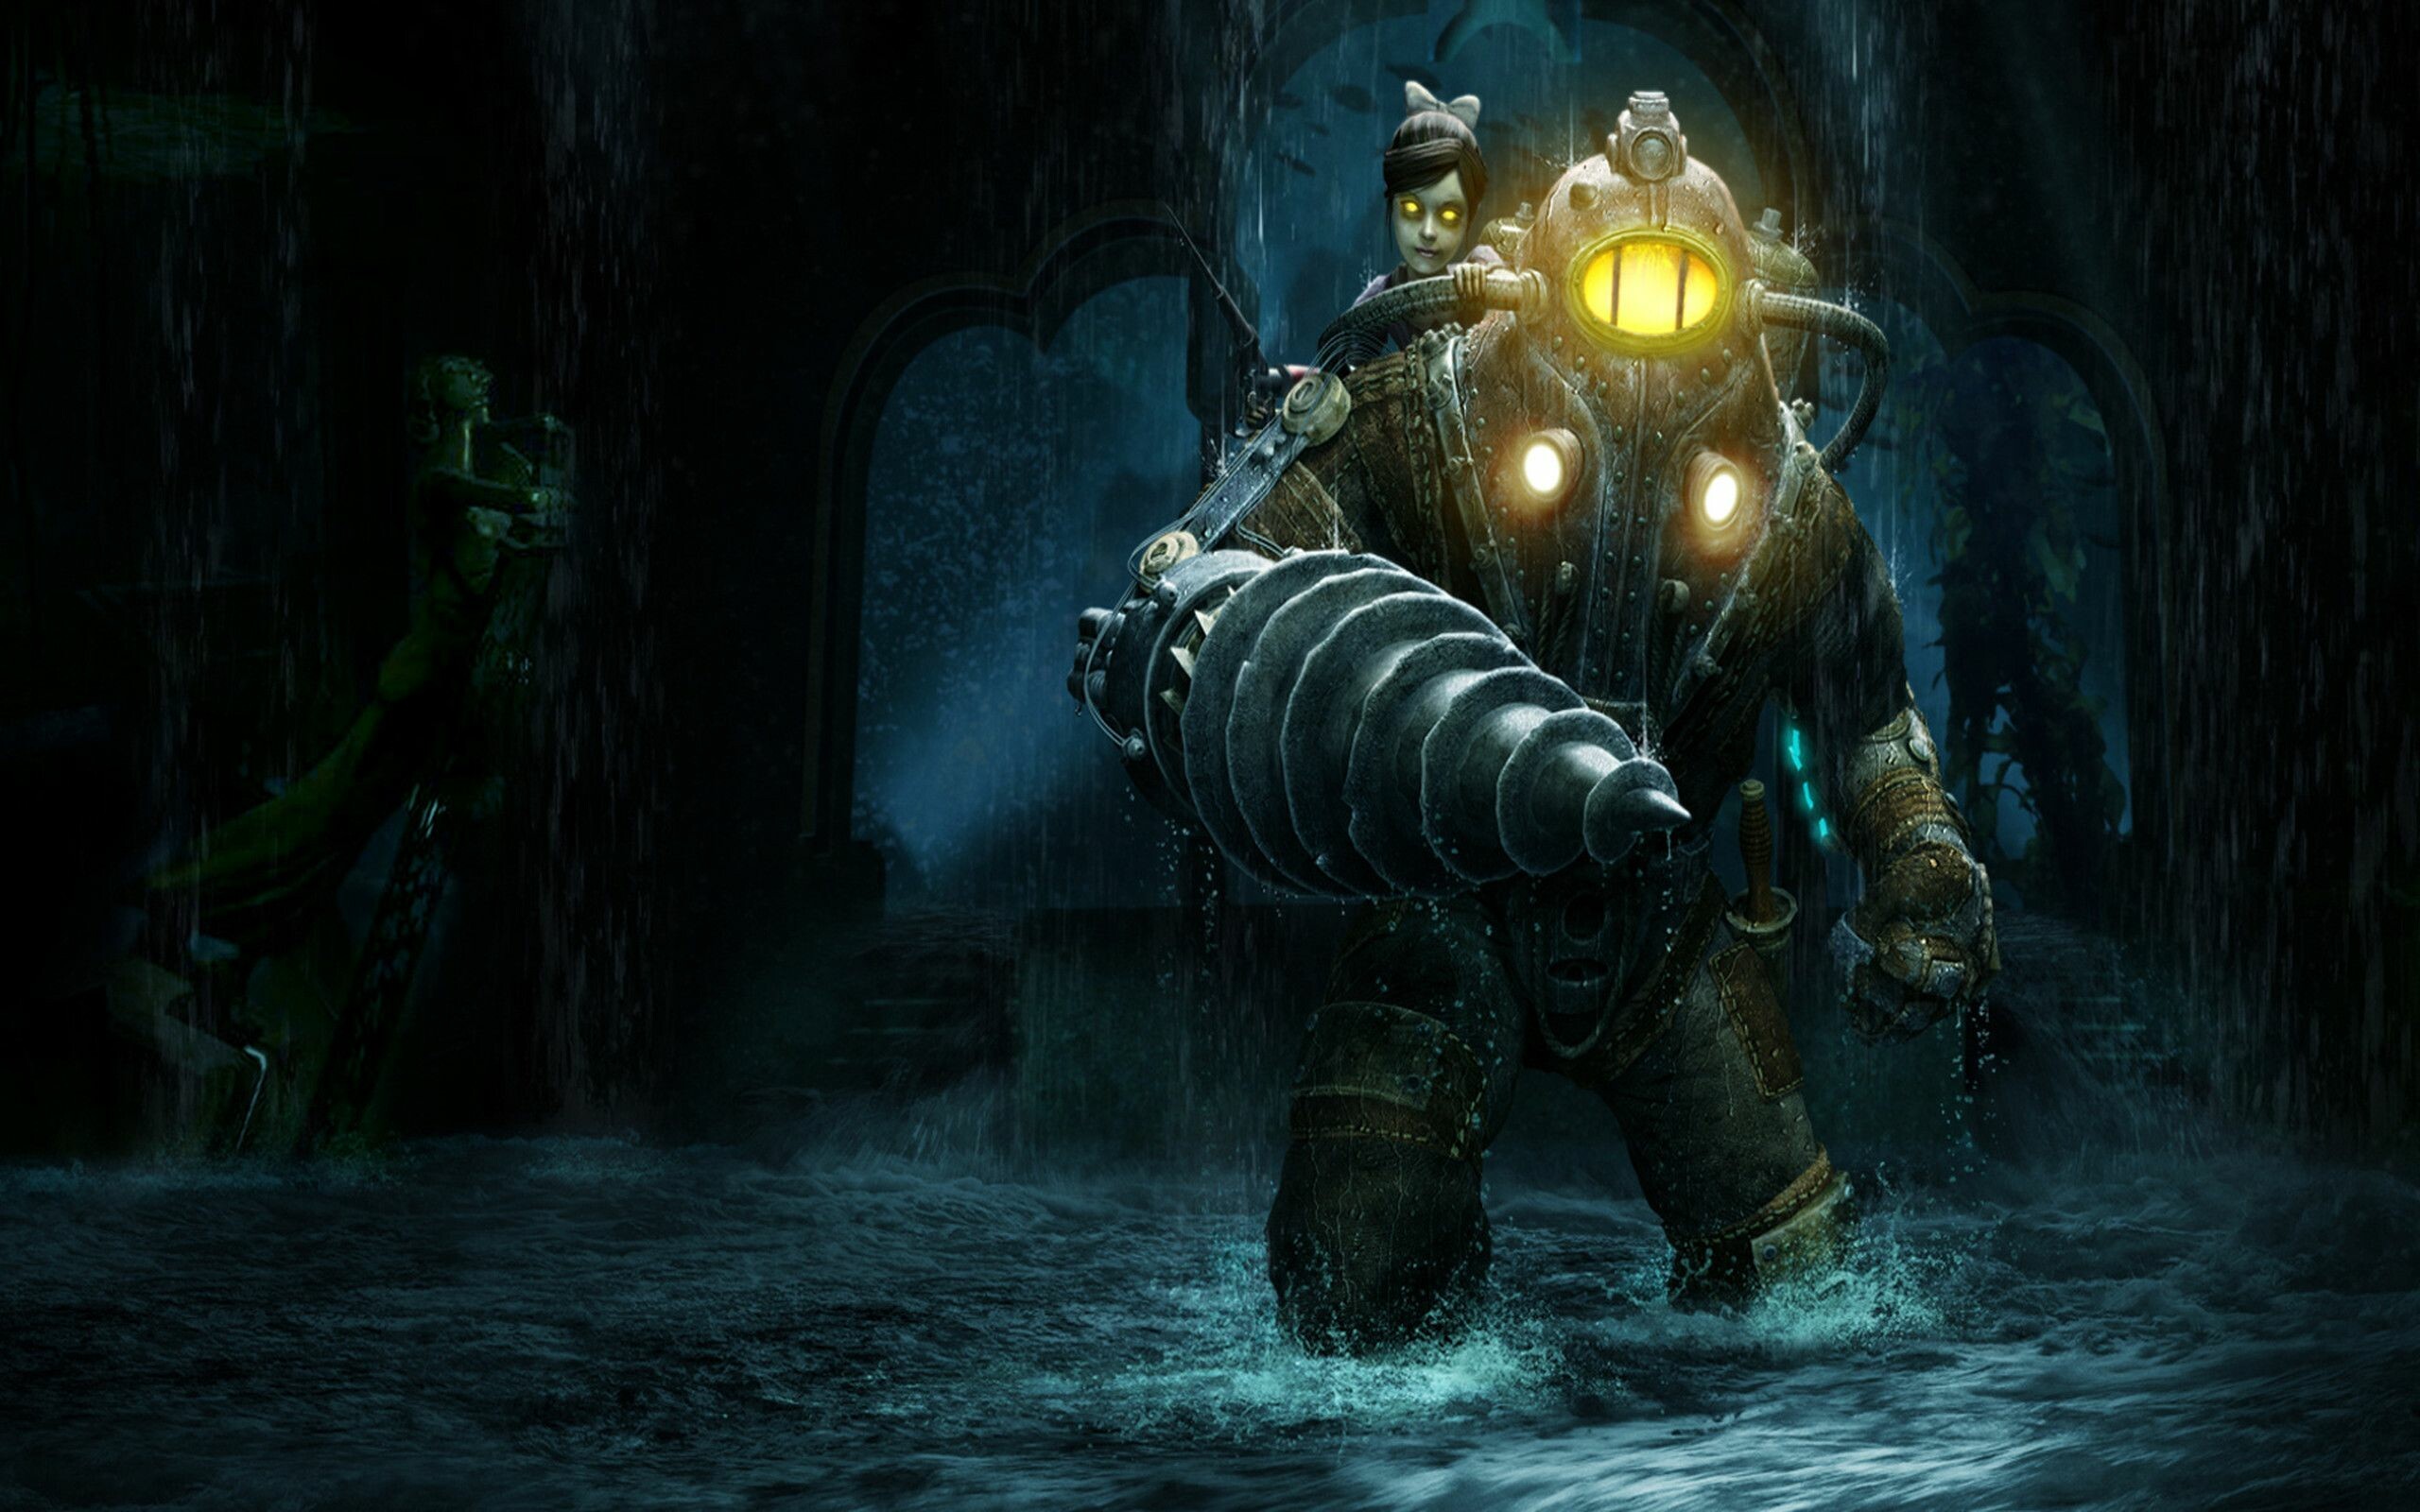 BioShock: A first-person shooter video game developed by 2K Marin. 2560x1600 HD Wallpaper.